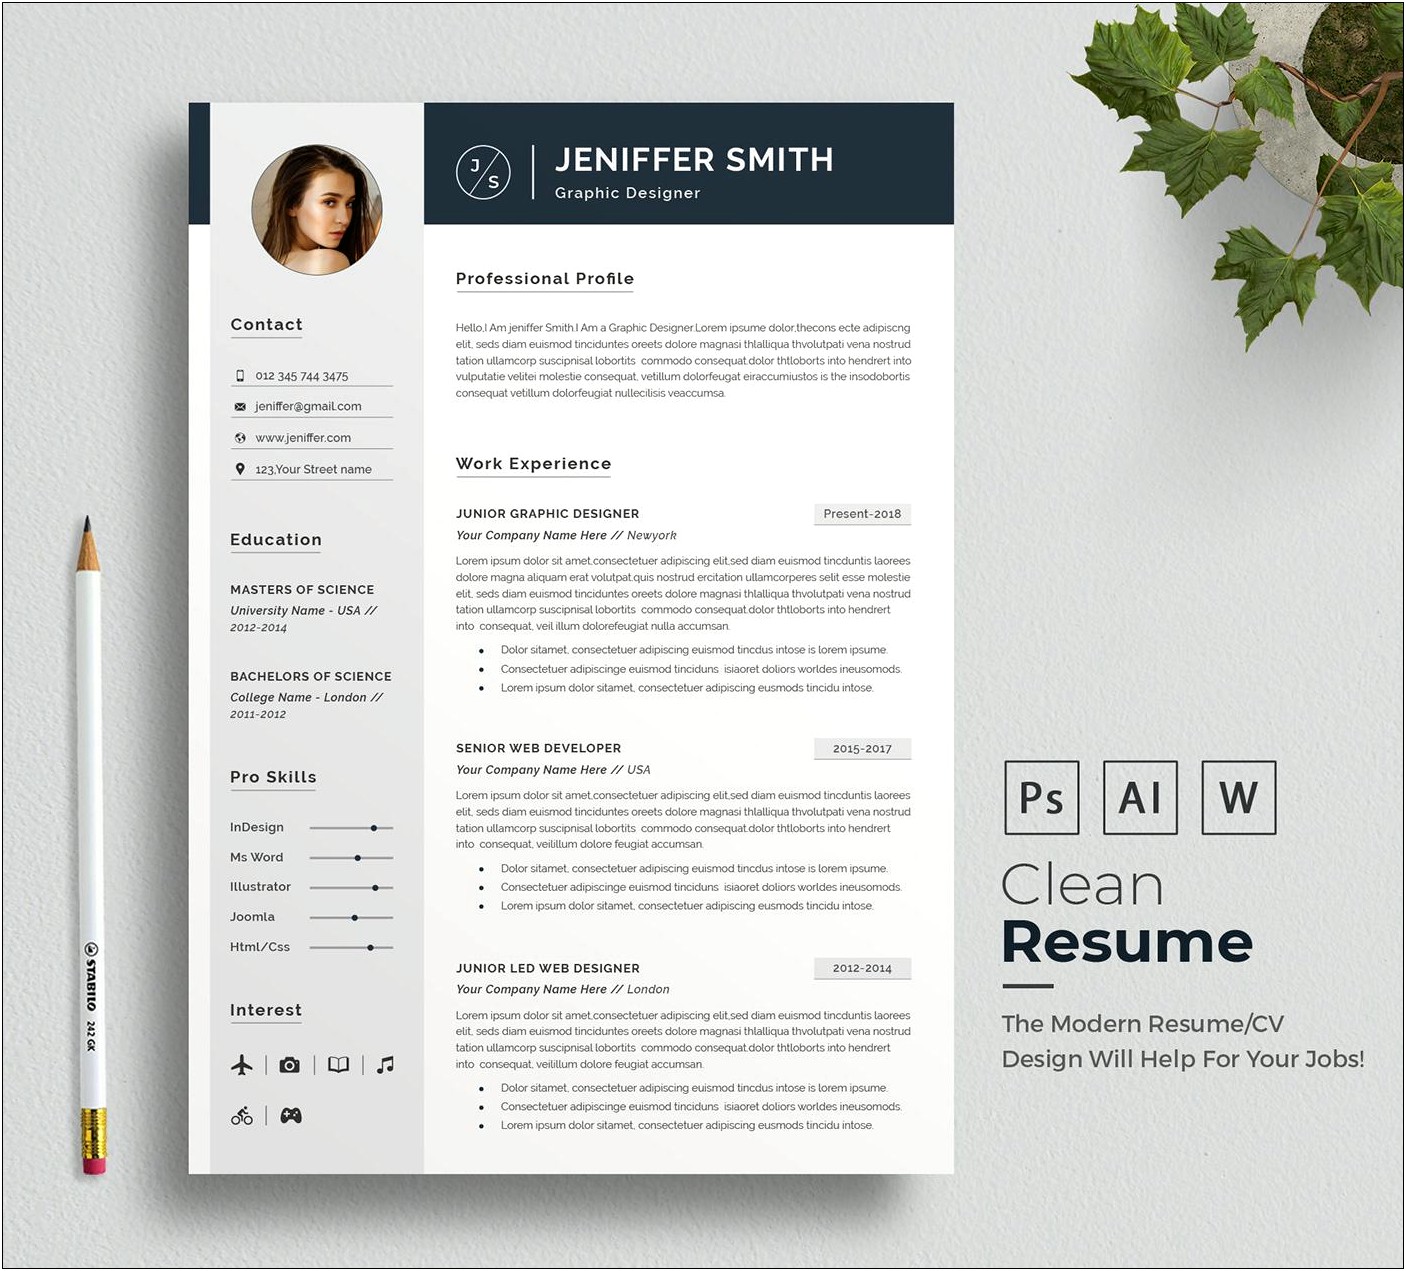 Best Format In Word For Resumes